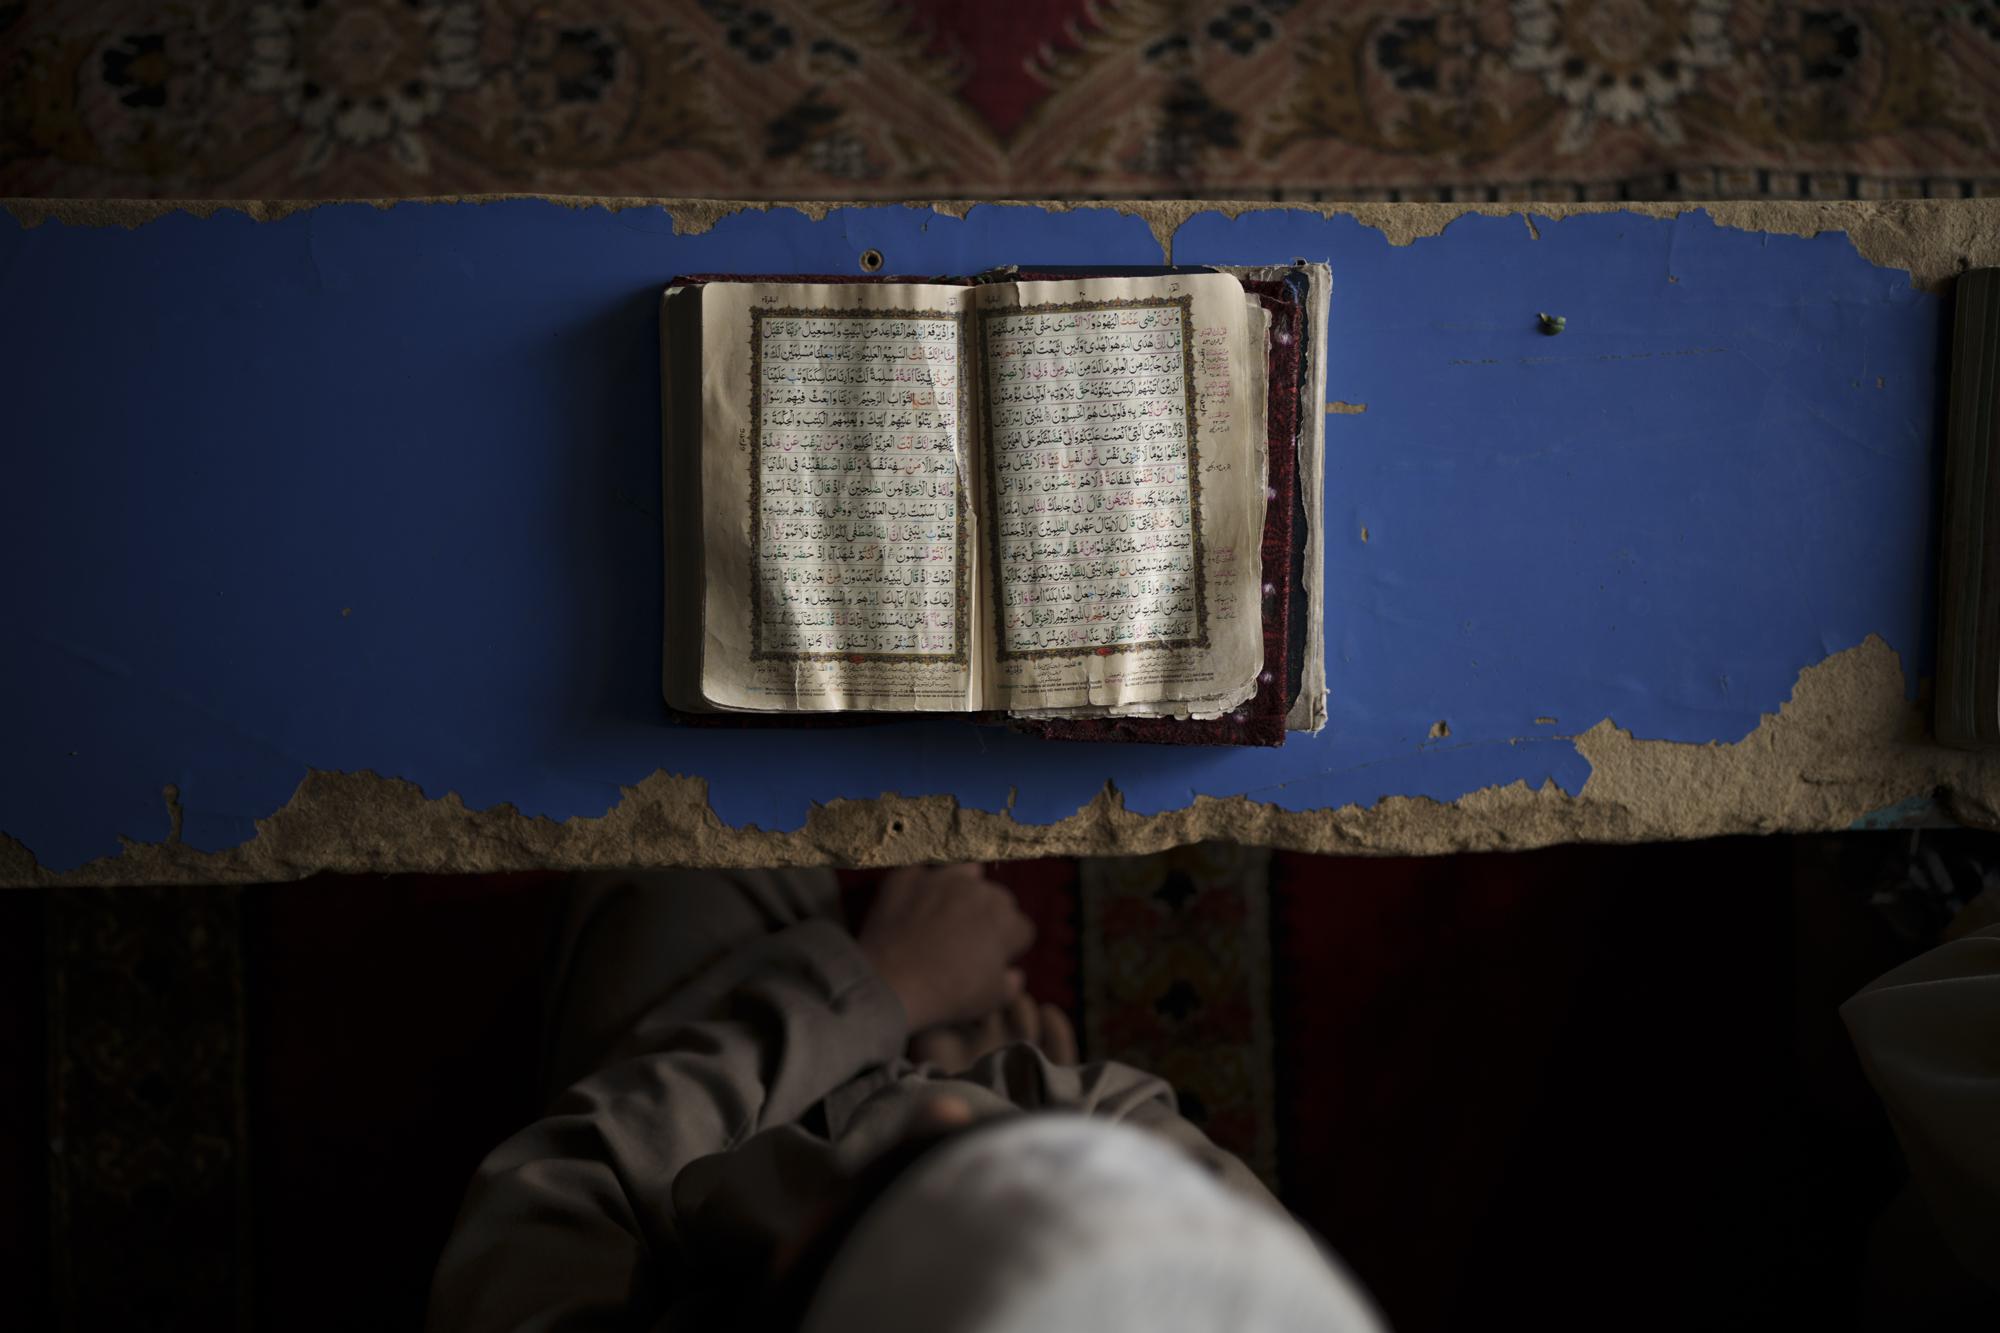 FILE - A student reads the Quran at a madrassa in Kabul, Afghanistan, Tuesday, Sept. 28, 2021. The American concept of adoption doesn’t exist in Afghanistan. Under Islamic law, a child’s bloodline cannot be severed and their heritage is sacred. Instead of adoption, a guardianship system called kafala allows Muslims to take in orphans and raise them as family, without relinquishing the child’s name or bloodline. (AP Photo/Felipe Dana, File)